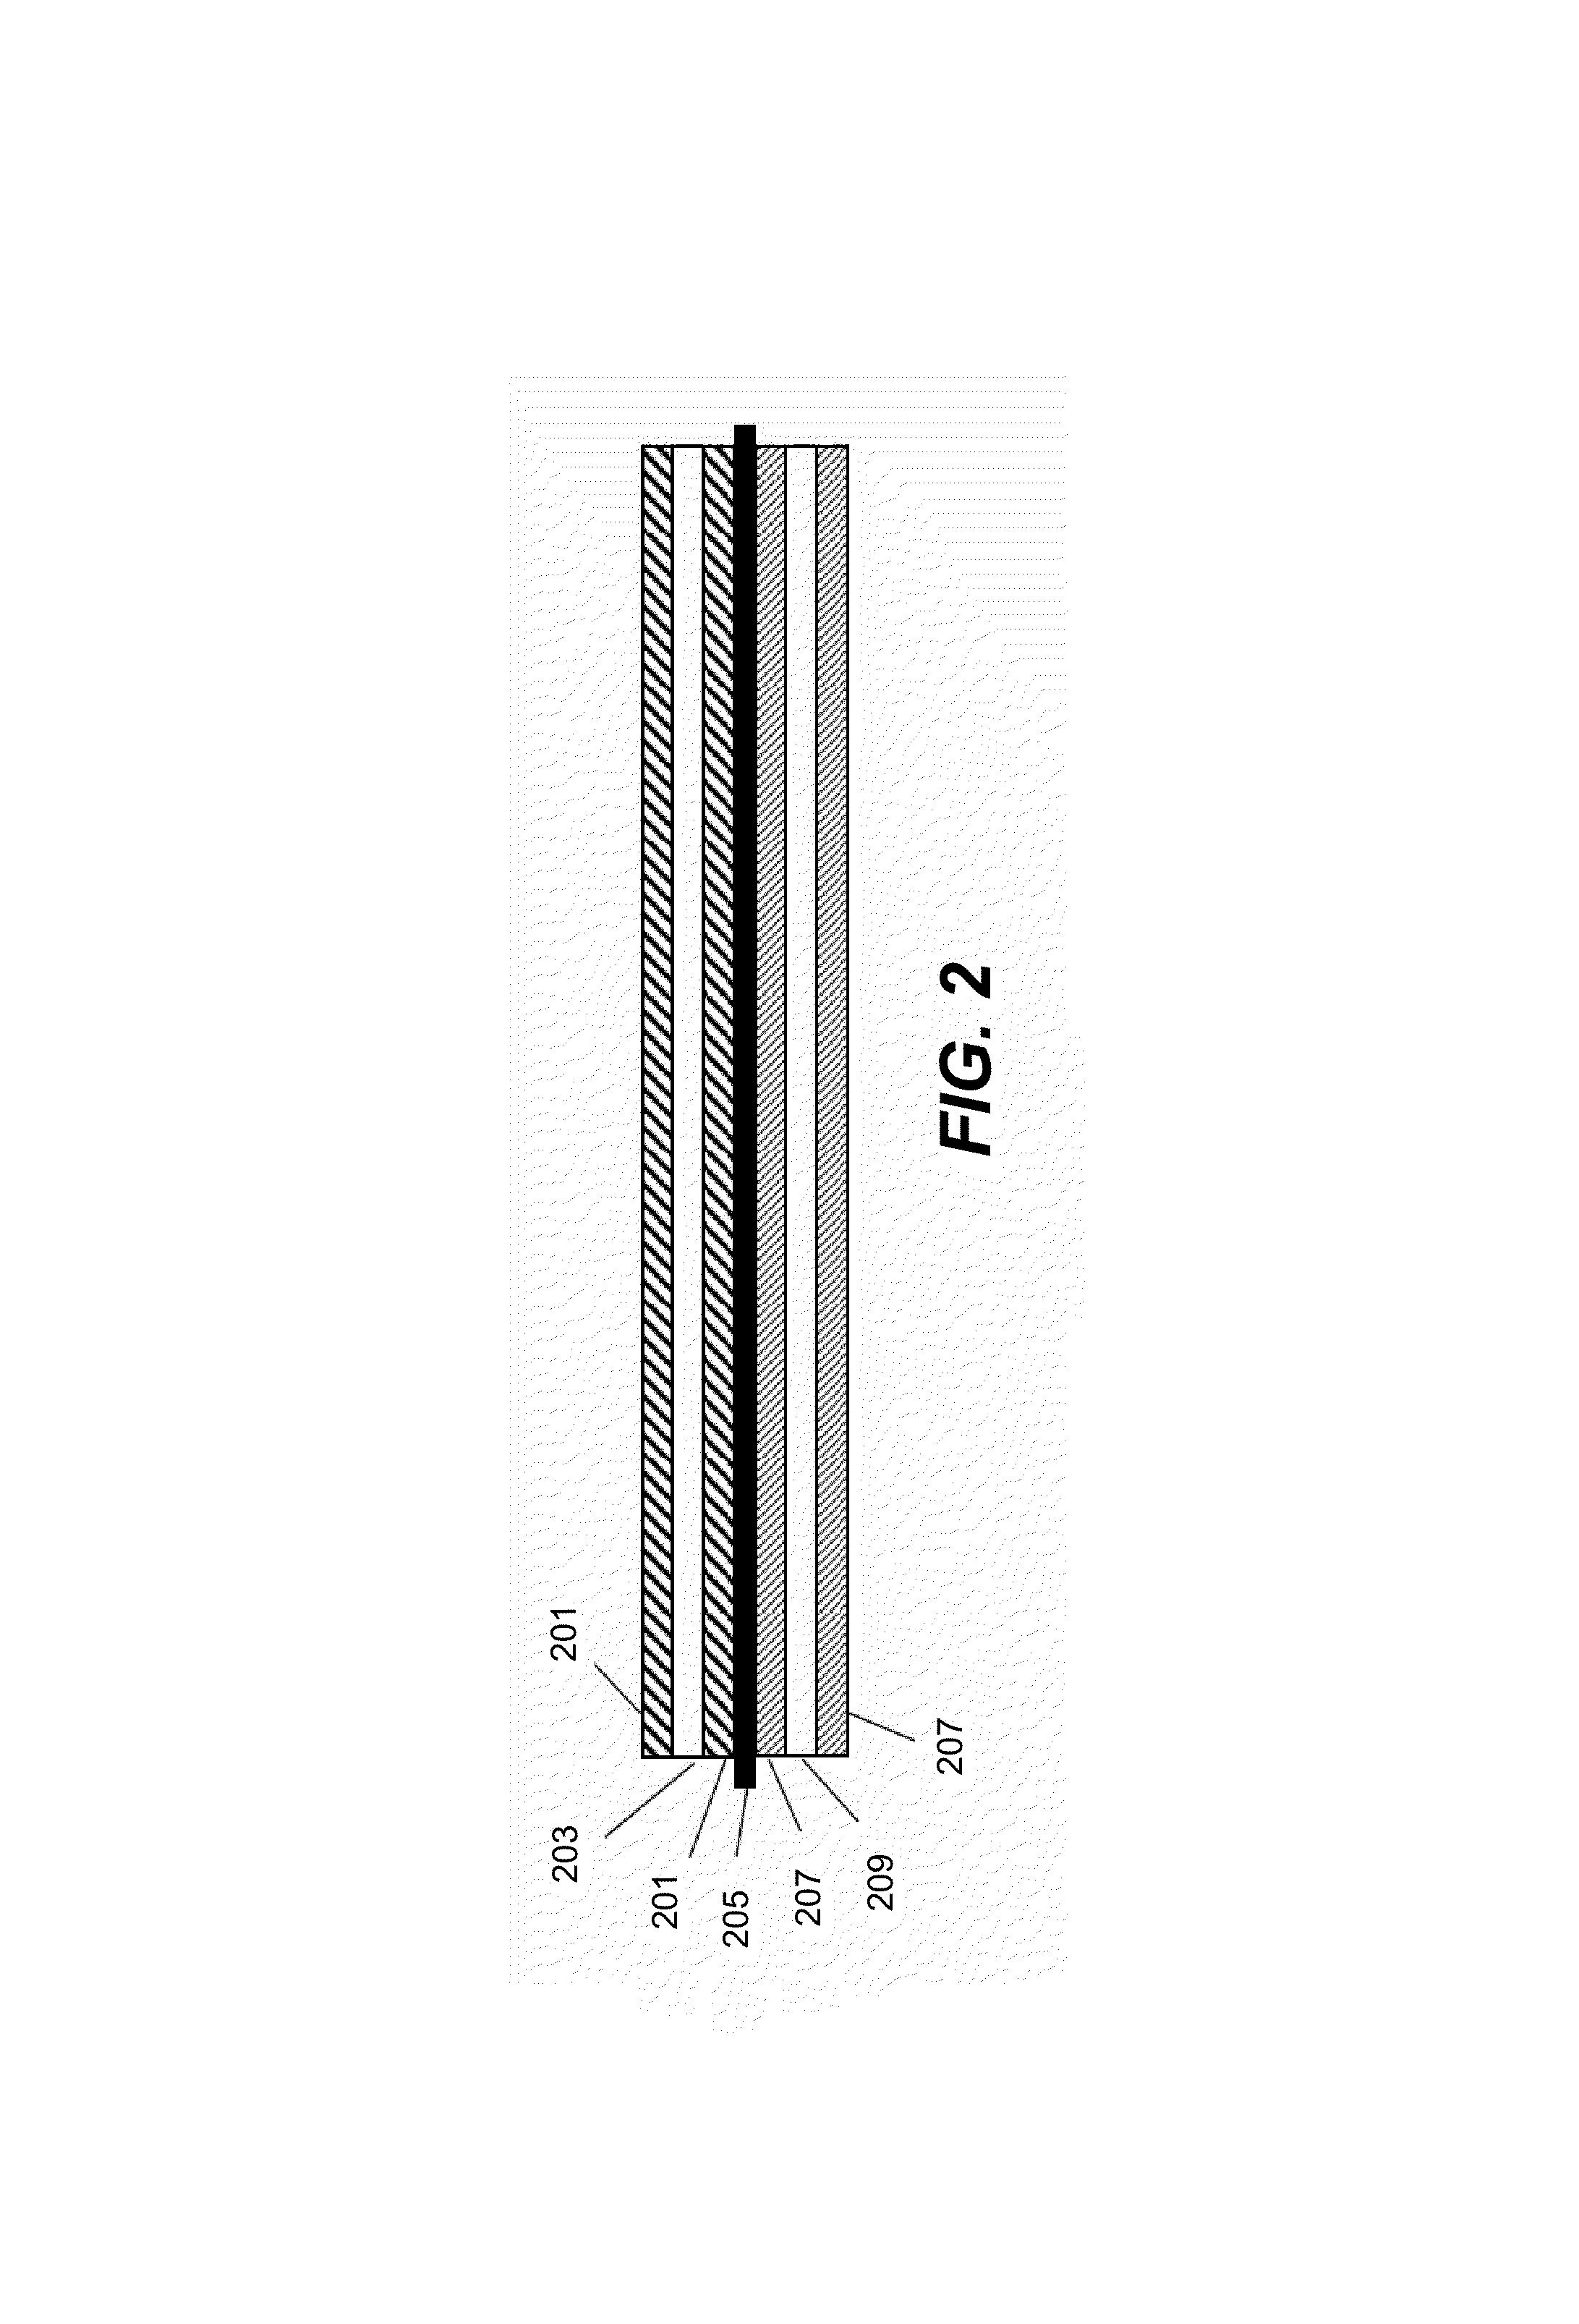 Pasted zinc electrode for rechargeable nickel-zinc batteries